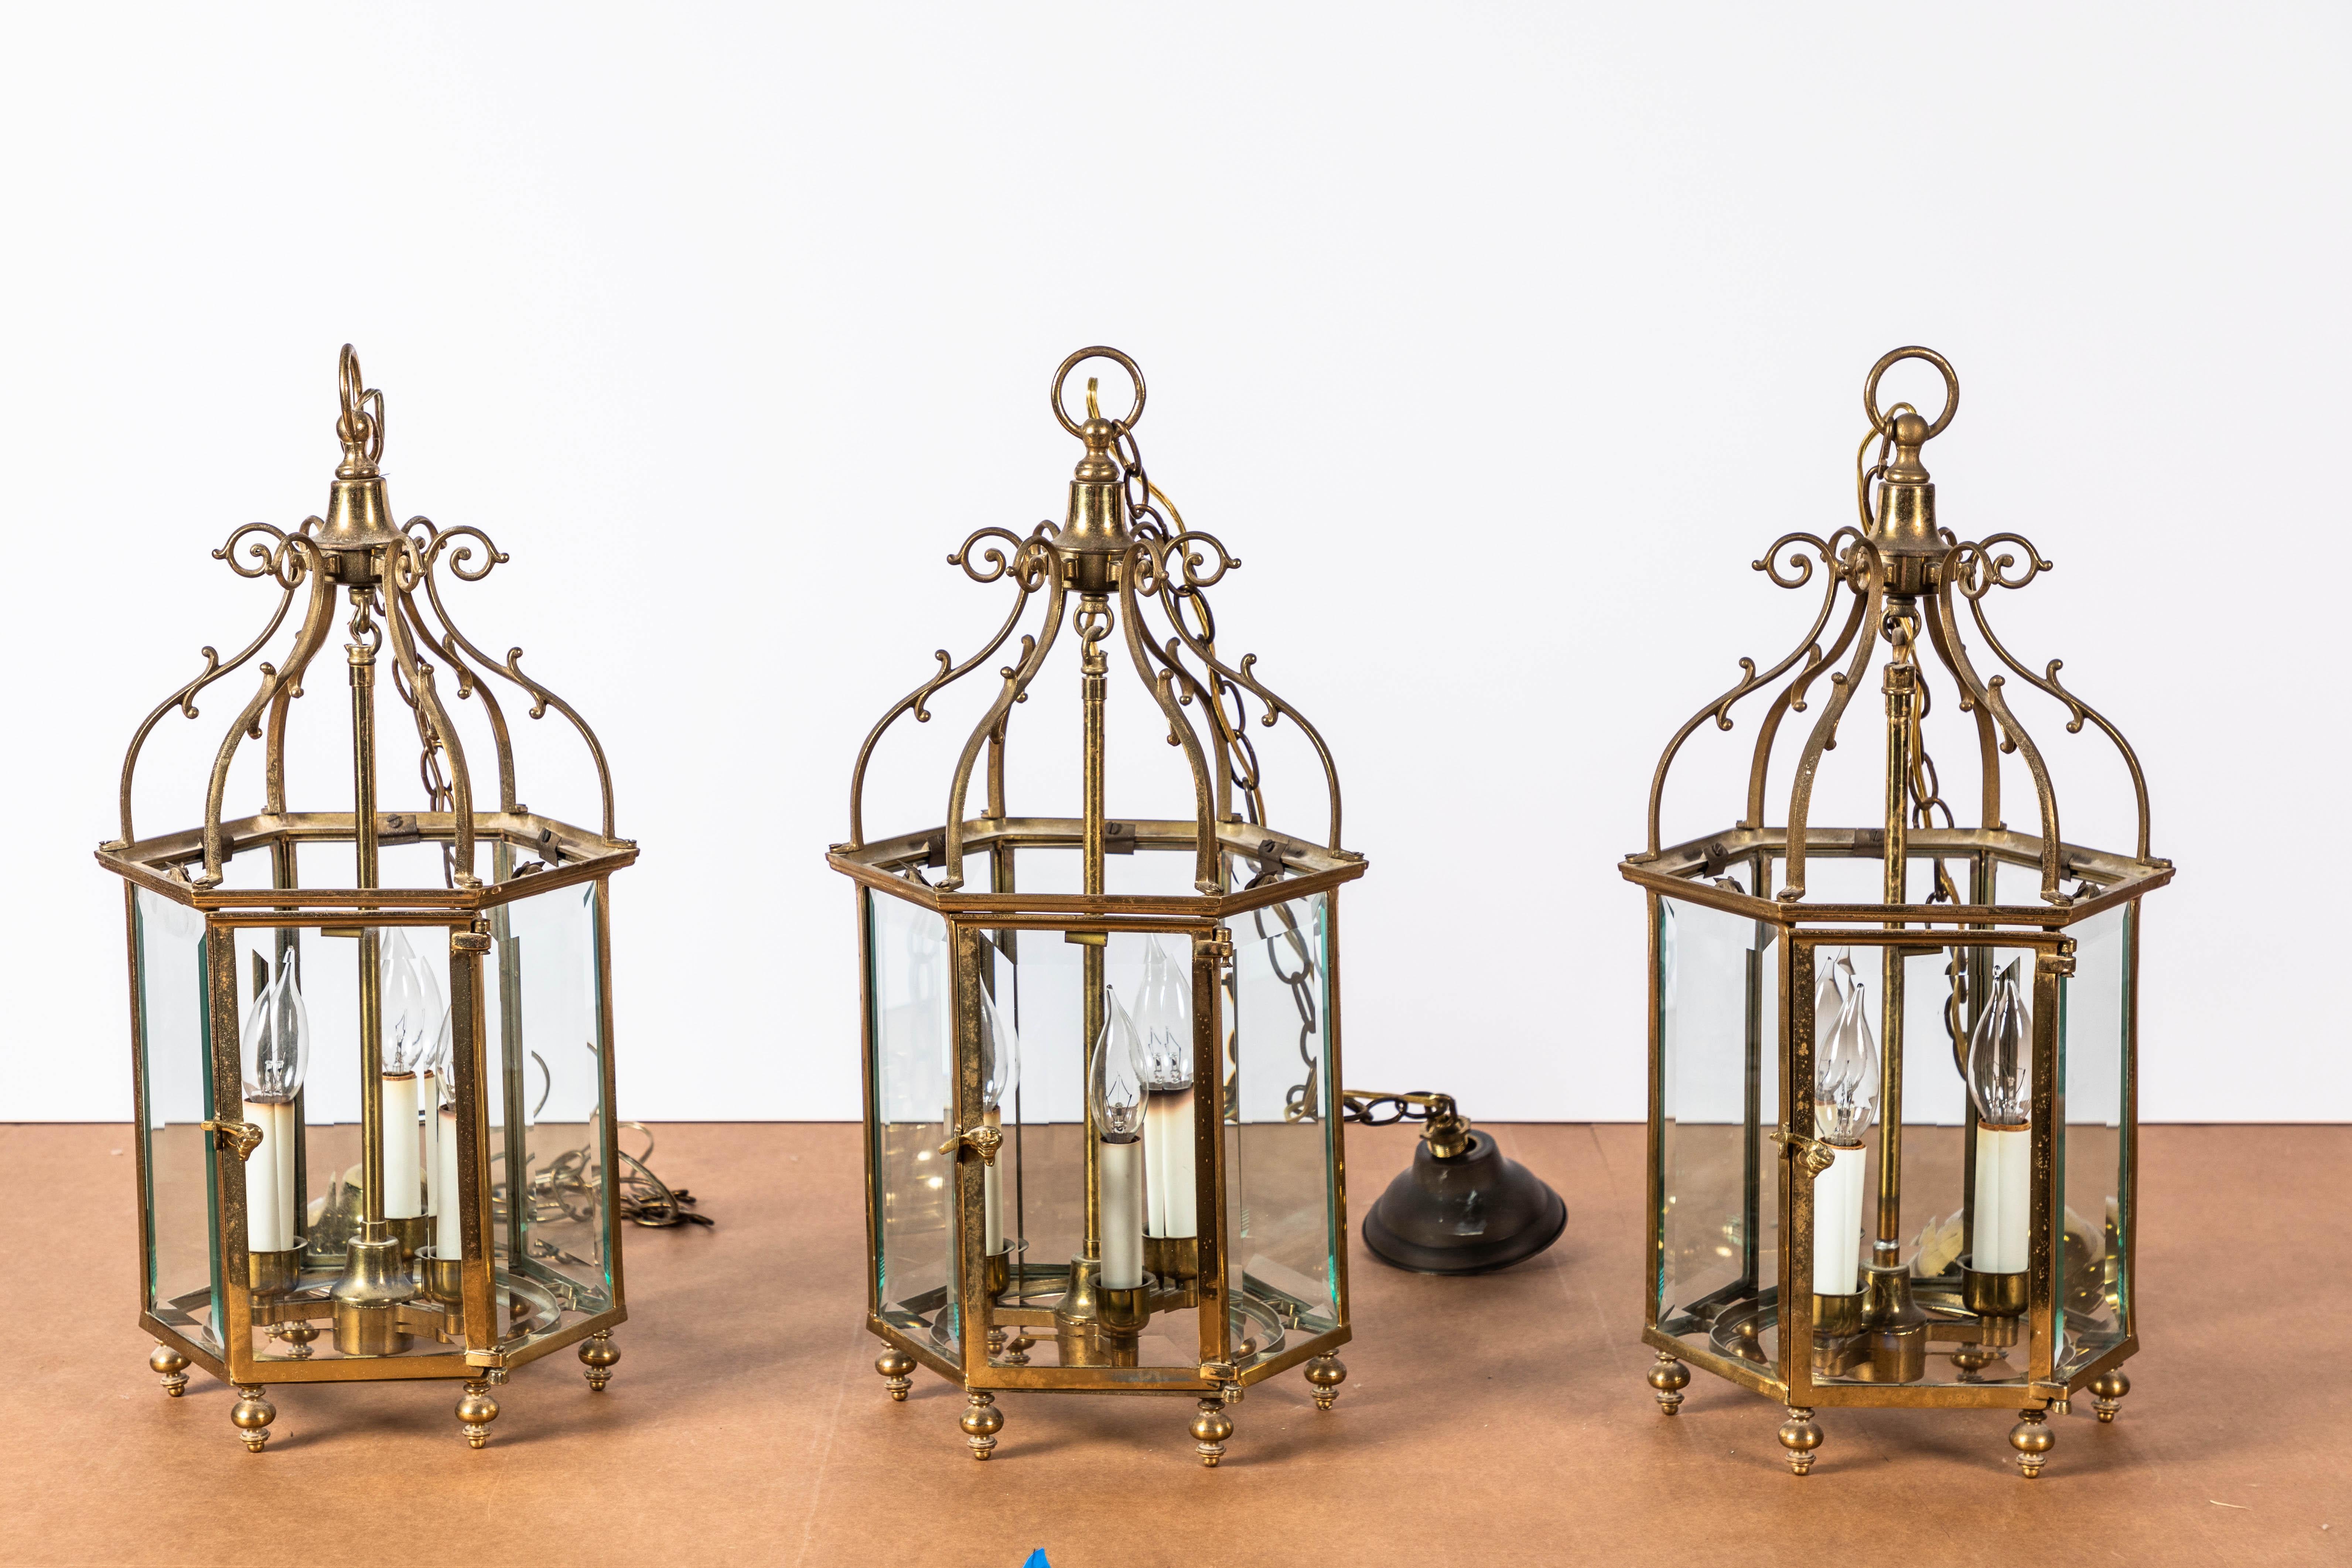 Set of three 20th century English handcrafted brass Georgian style lanterns with beveled glass. Each lantern has three candle lights. Various chain lengths of 20